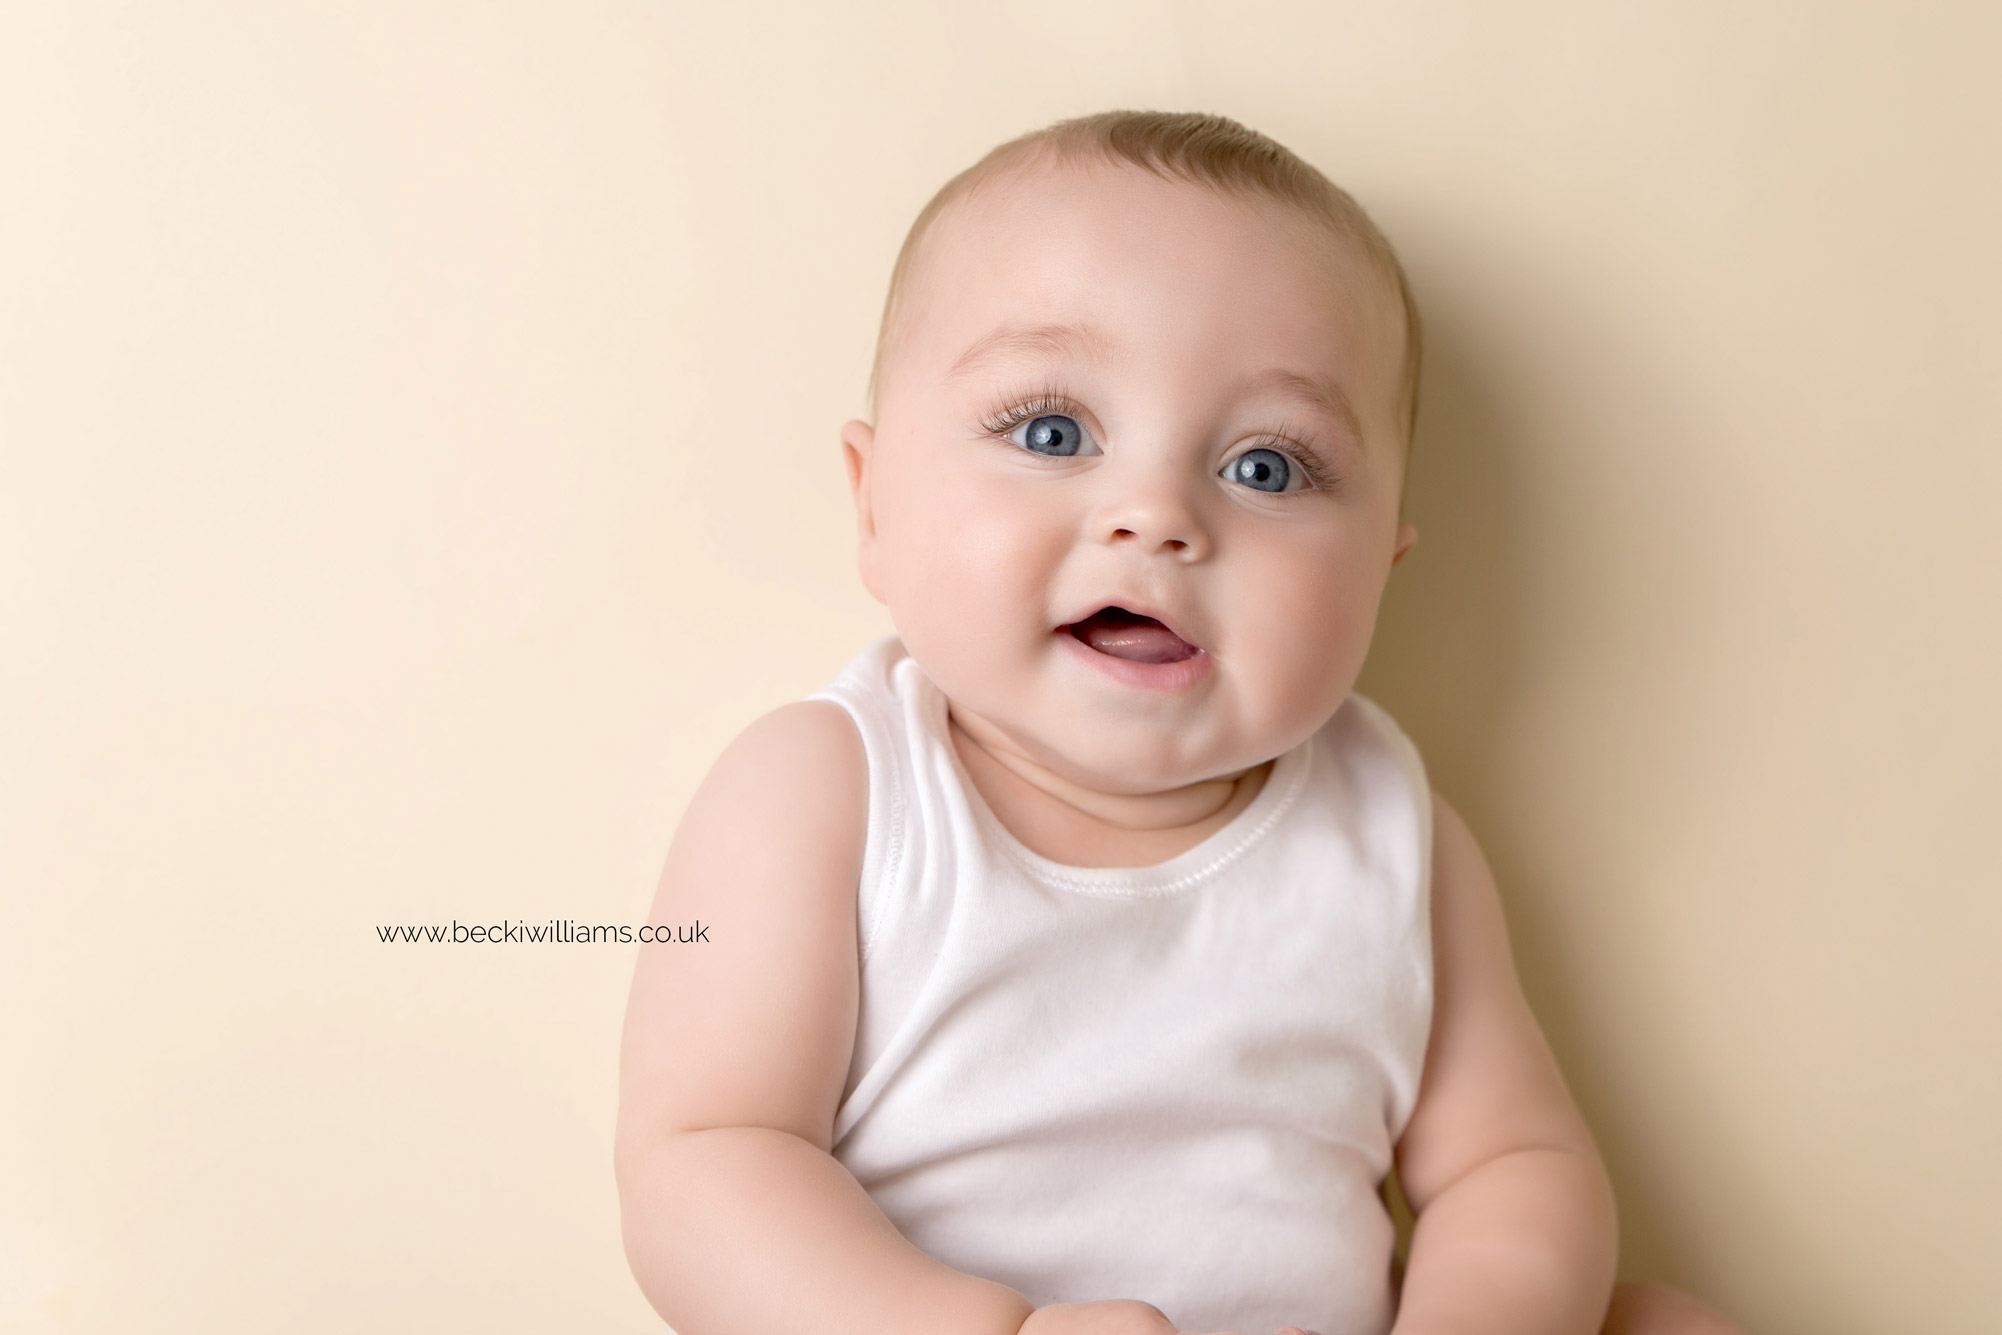 5 month old baby boy lays on the floor, looking up at the camera smiling.  He is wearing a white vest